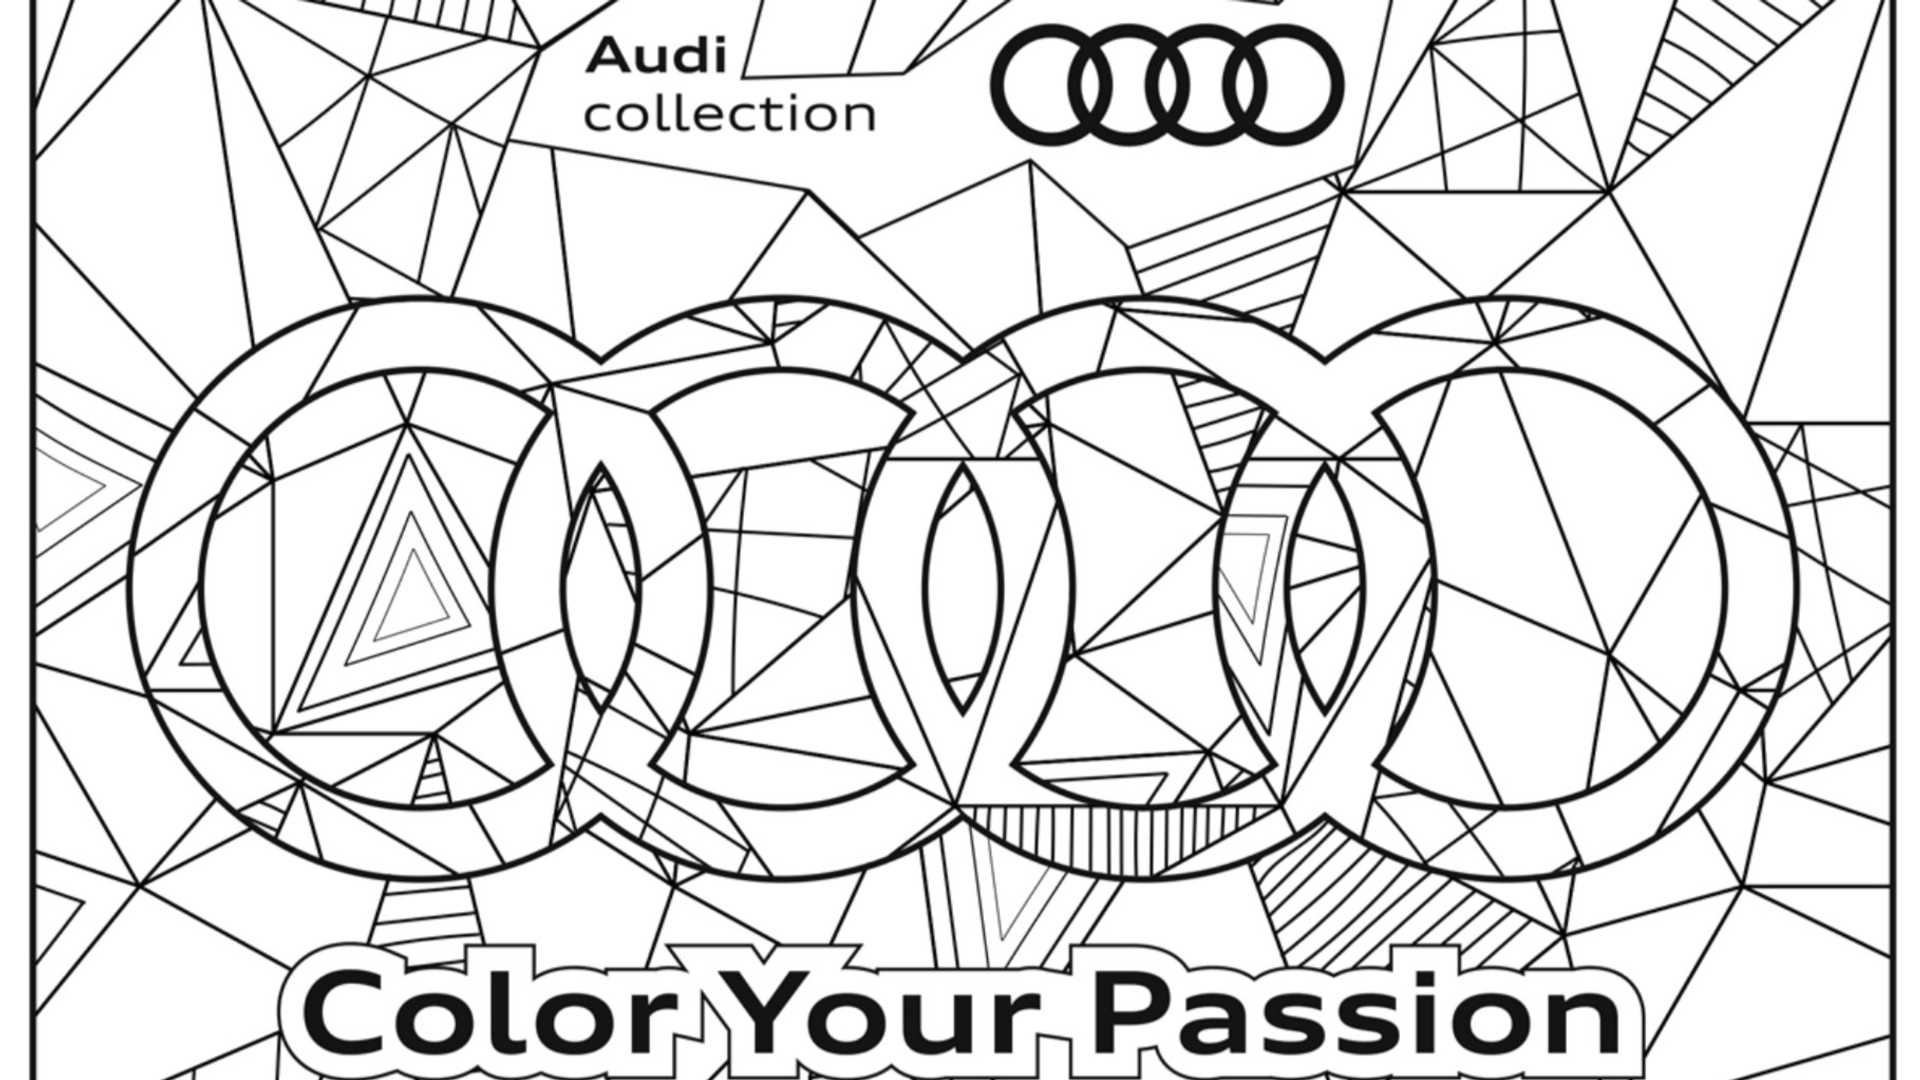 Free Audi Coloring Book Makes The Time Go By Pleasantly